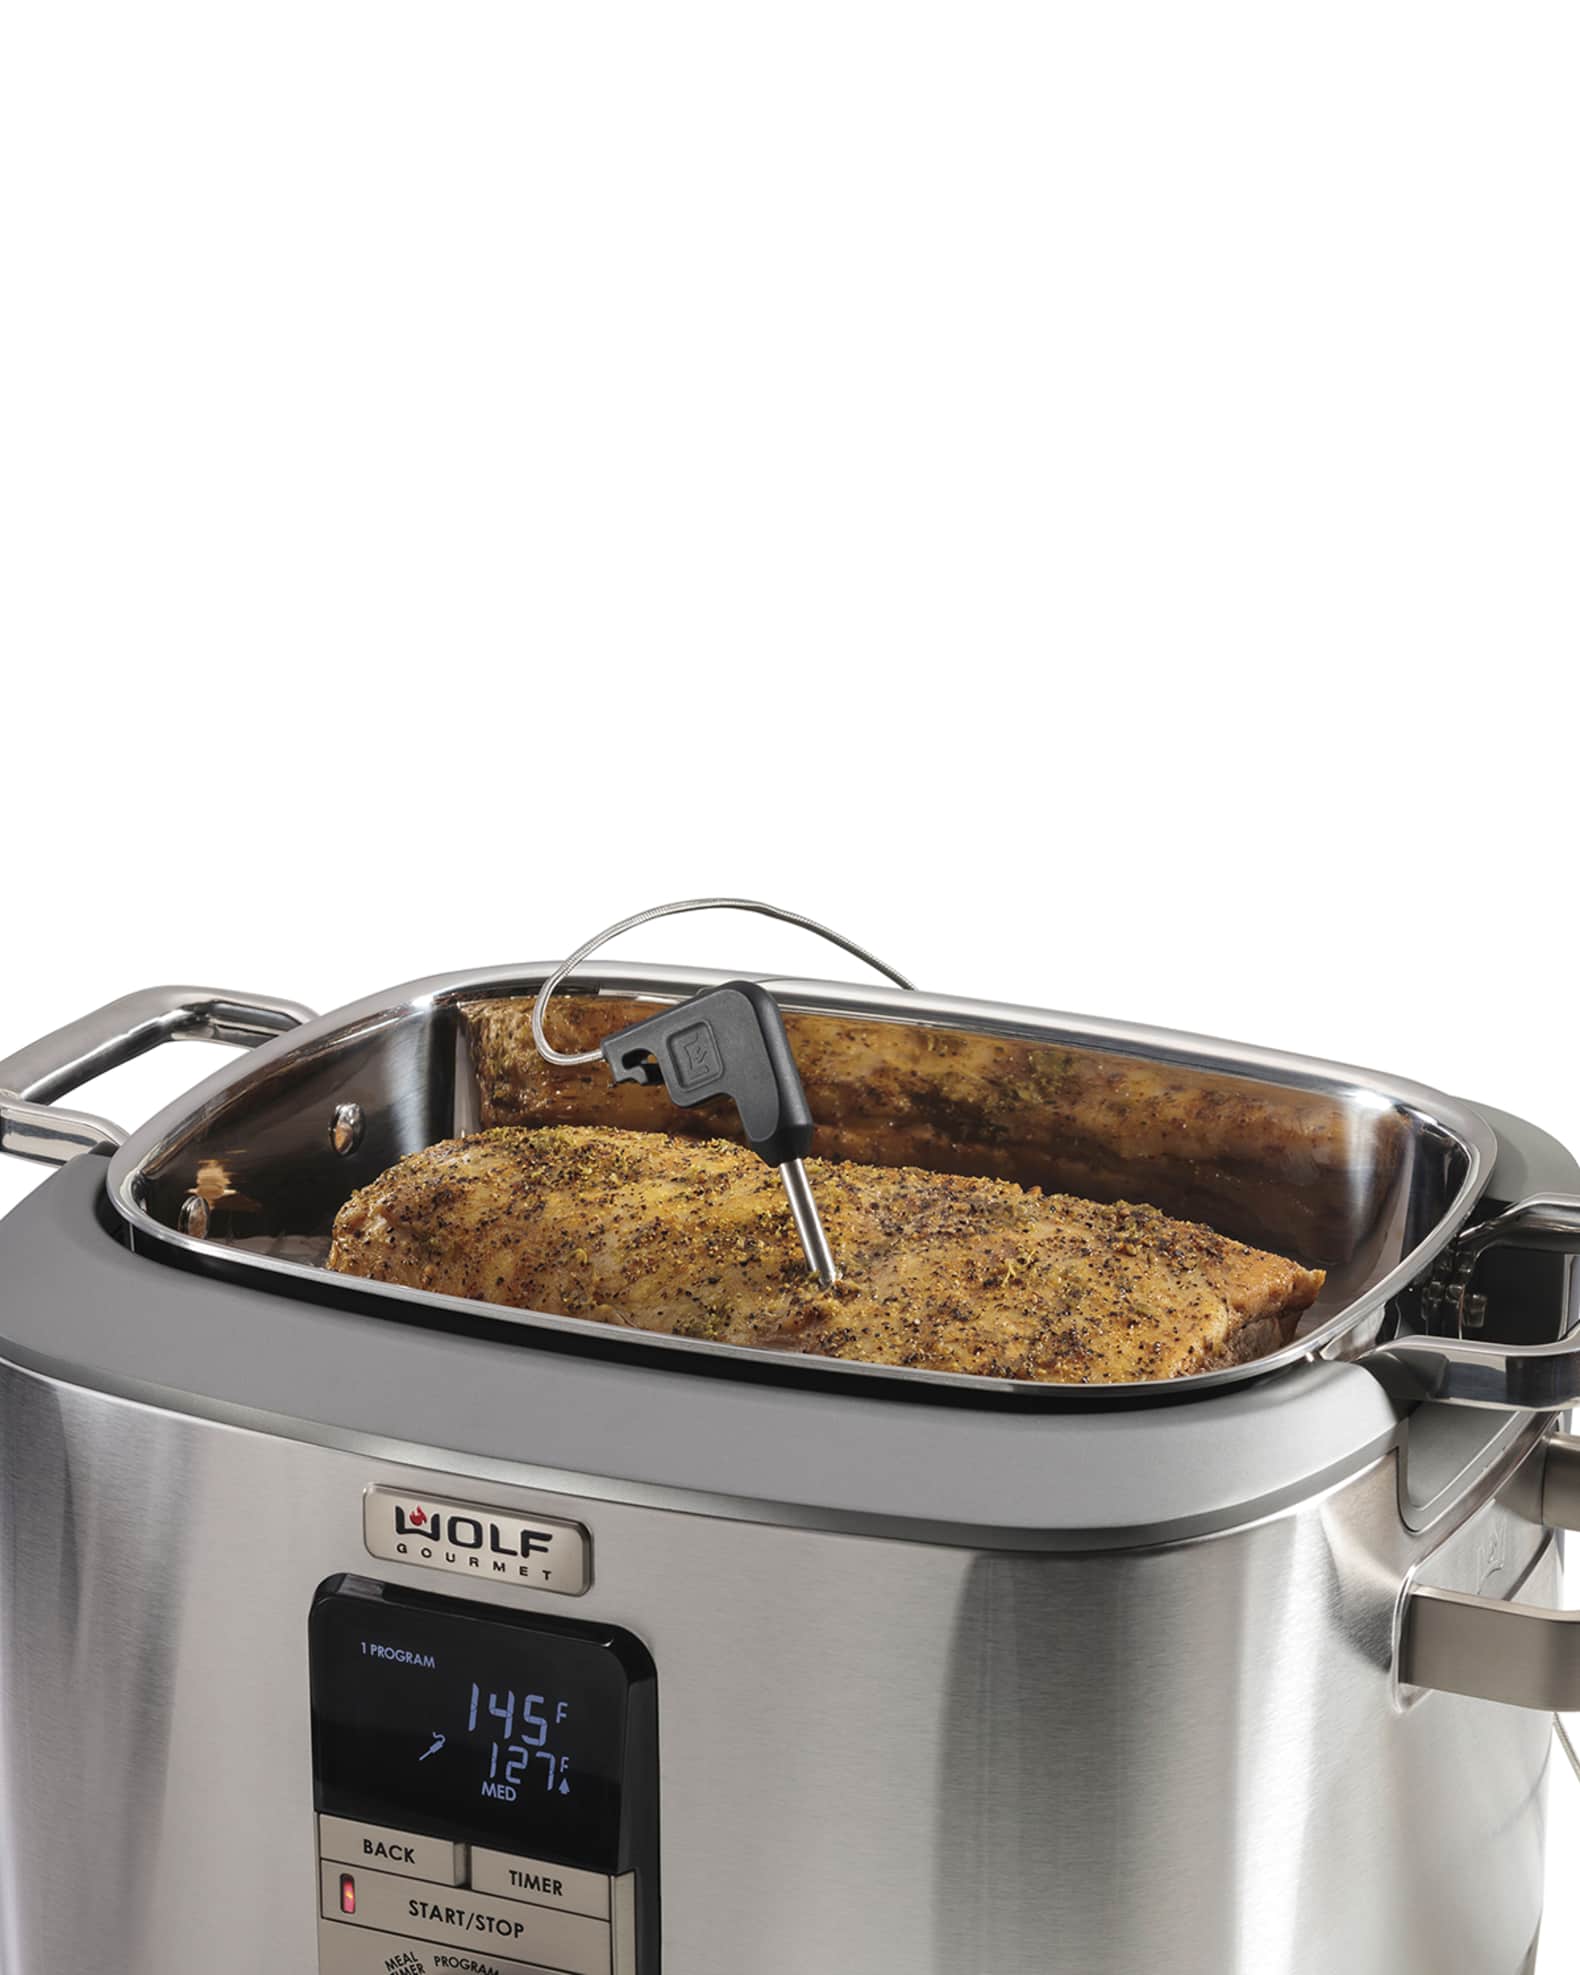 Wolf Gourmet WGSC100S Programmable Multi Function Cooker With